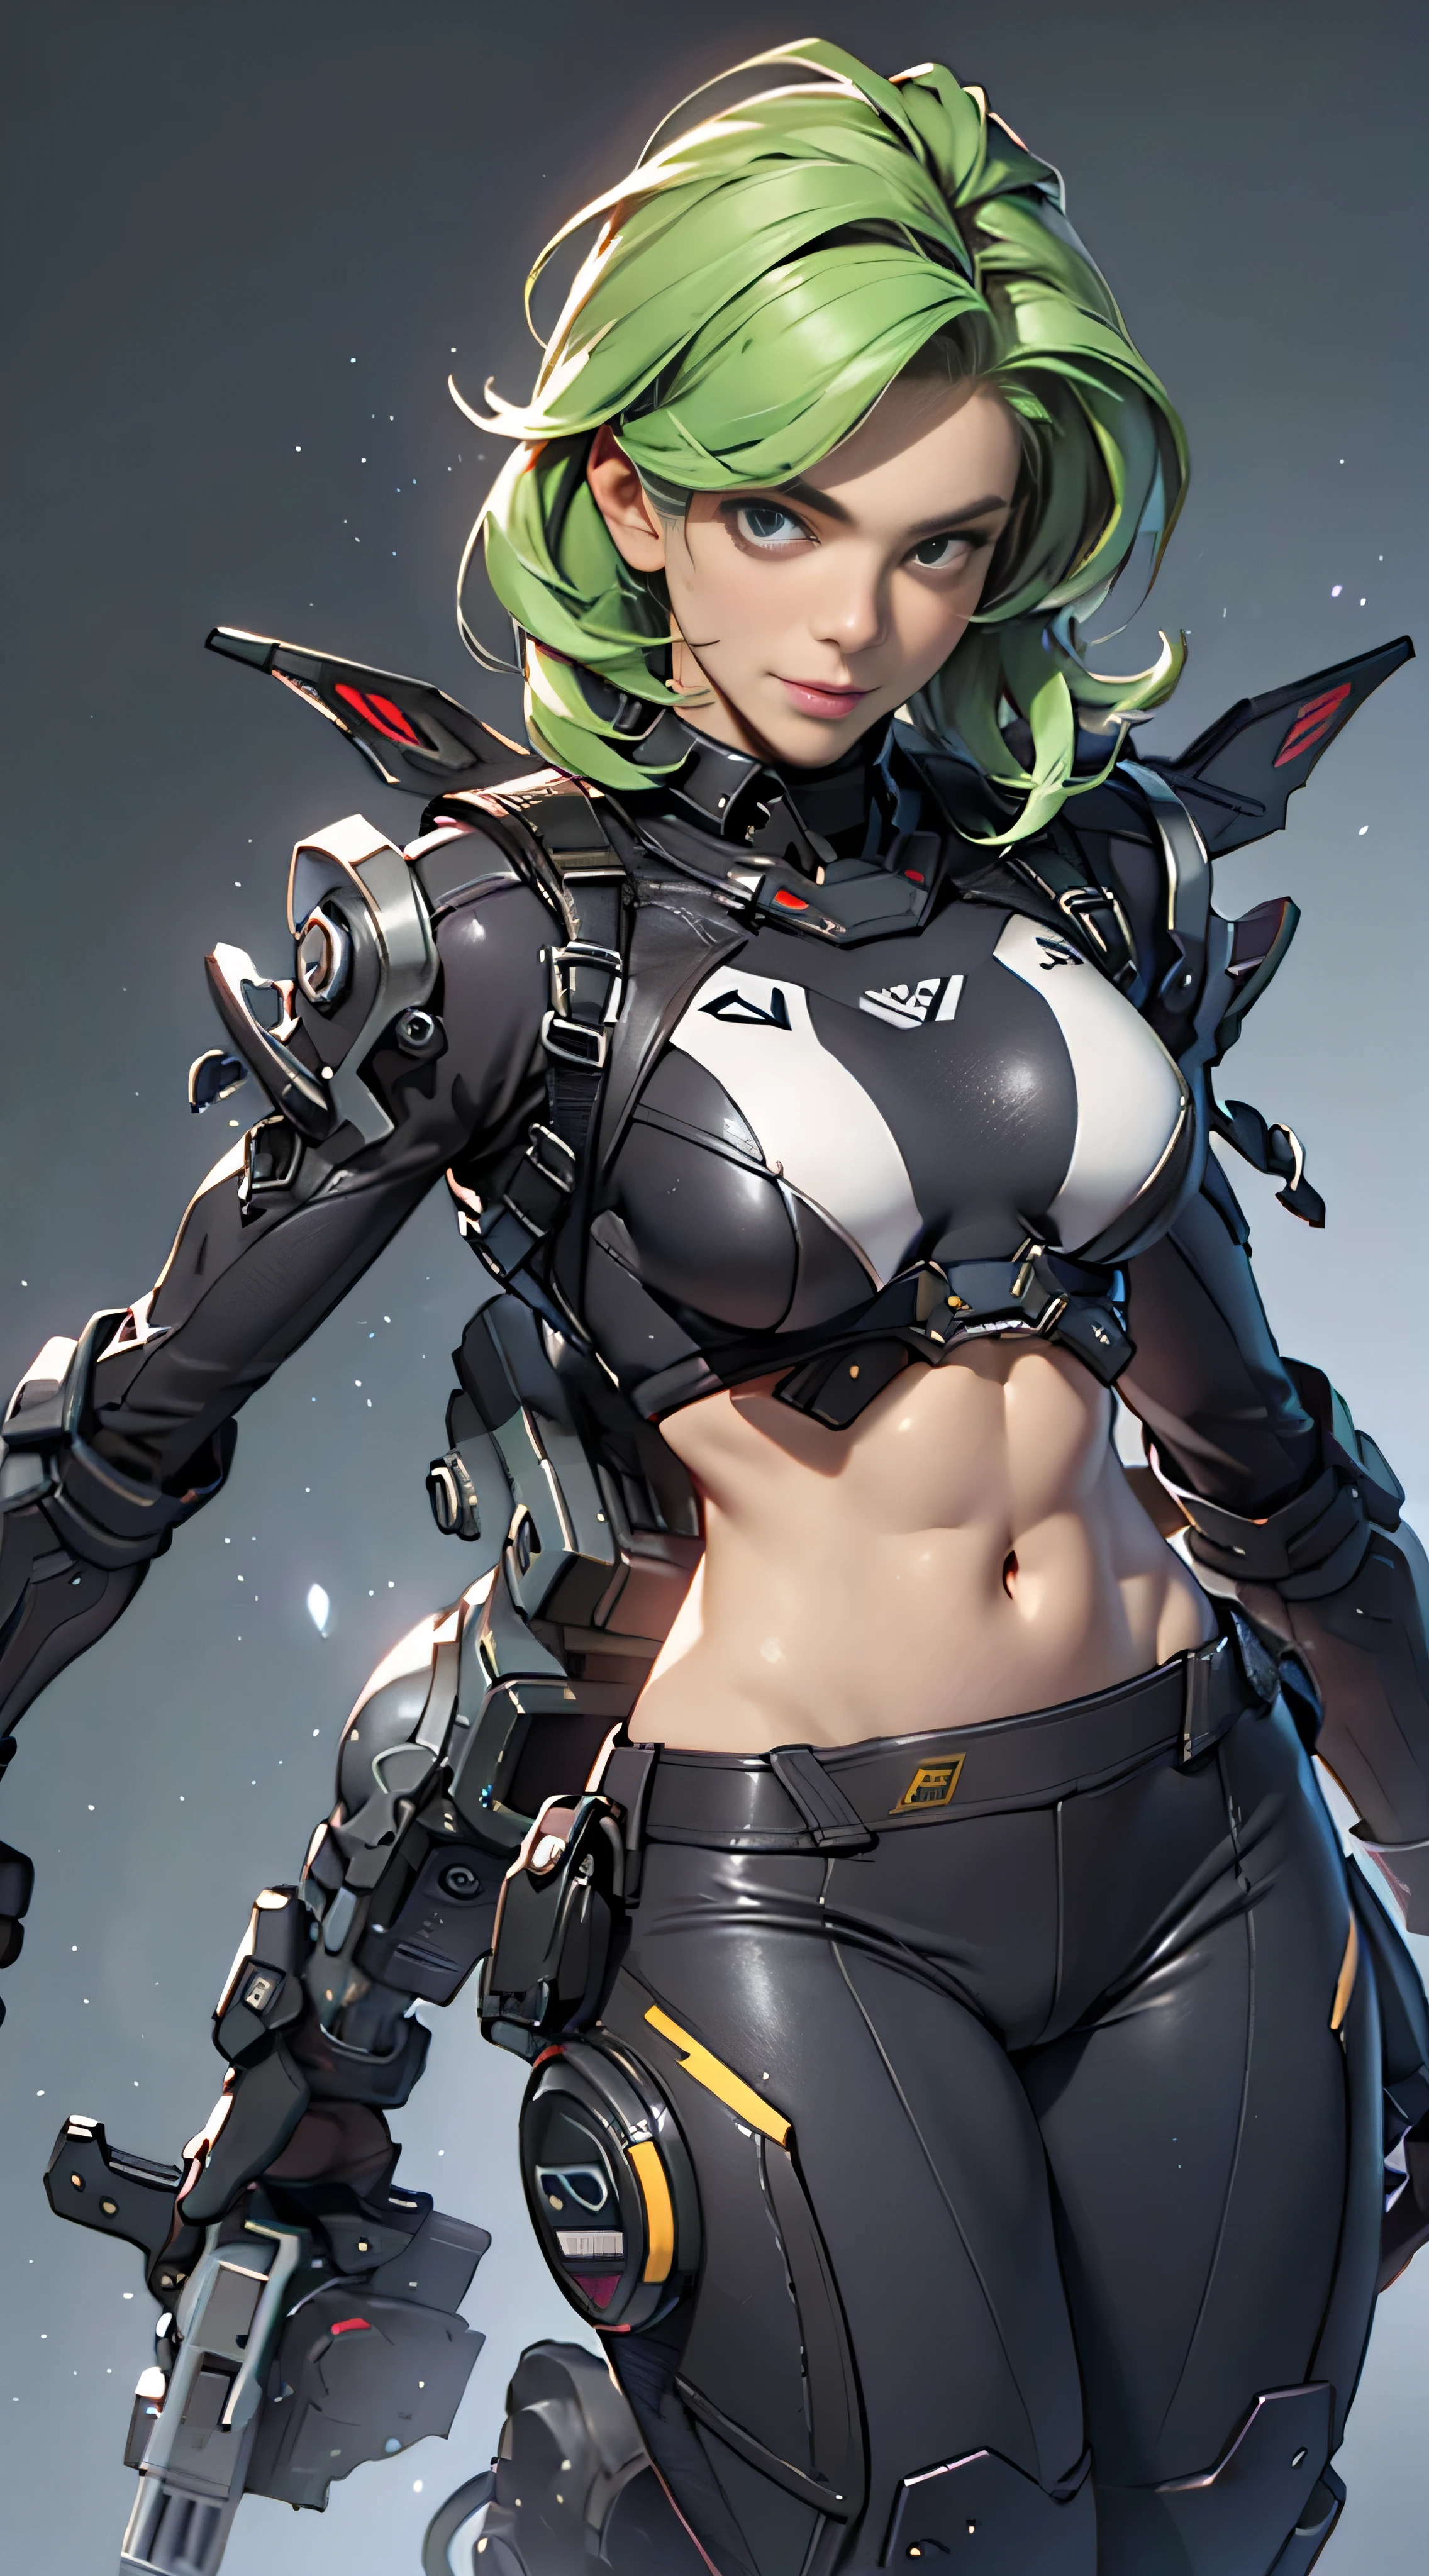 11:23(((Best quality at best: 1.4))),(Unbeatable masterpiece), (hyper HD),(Hyper-realistic 8k CG)、（Light green hair） ((( body))), (((1 girl in))), 25-year-old American soldier with perfect body,,Beautiful and well-groomed face,muscular body:1.2,Solid royal blue jacket with details, (Pictures from head to thighs)， Complex equipment, Purple coat，long trousers，The clothes inside are gray，Clothes with metal electronic parts,Tech Armor )